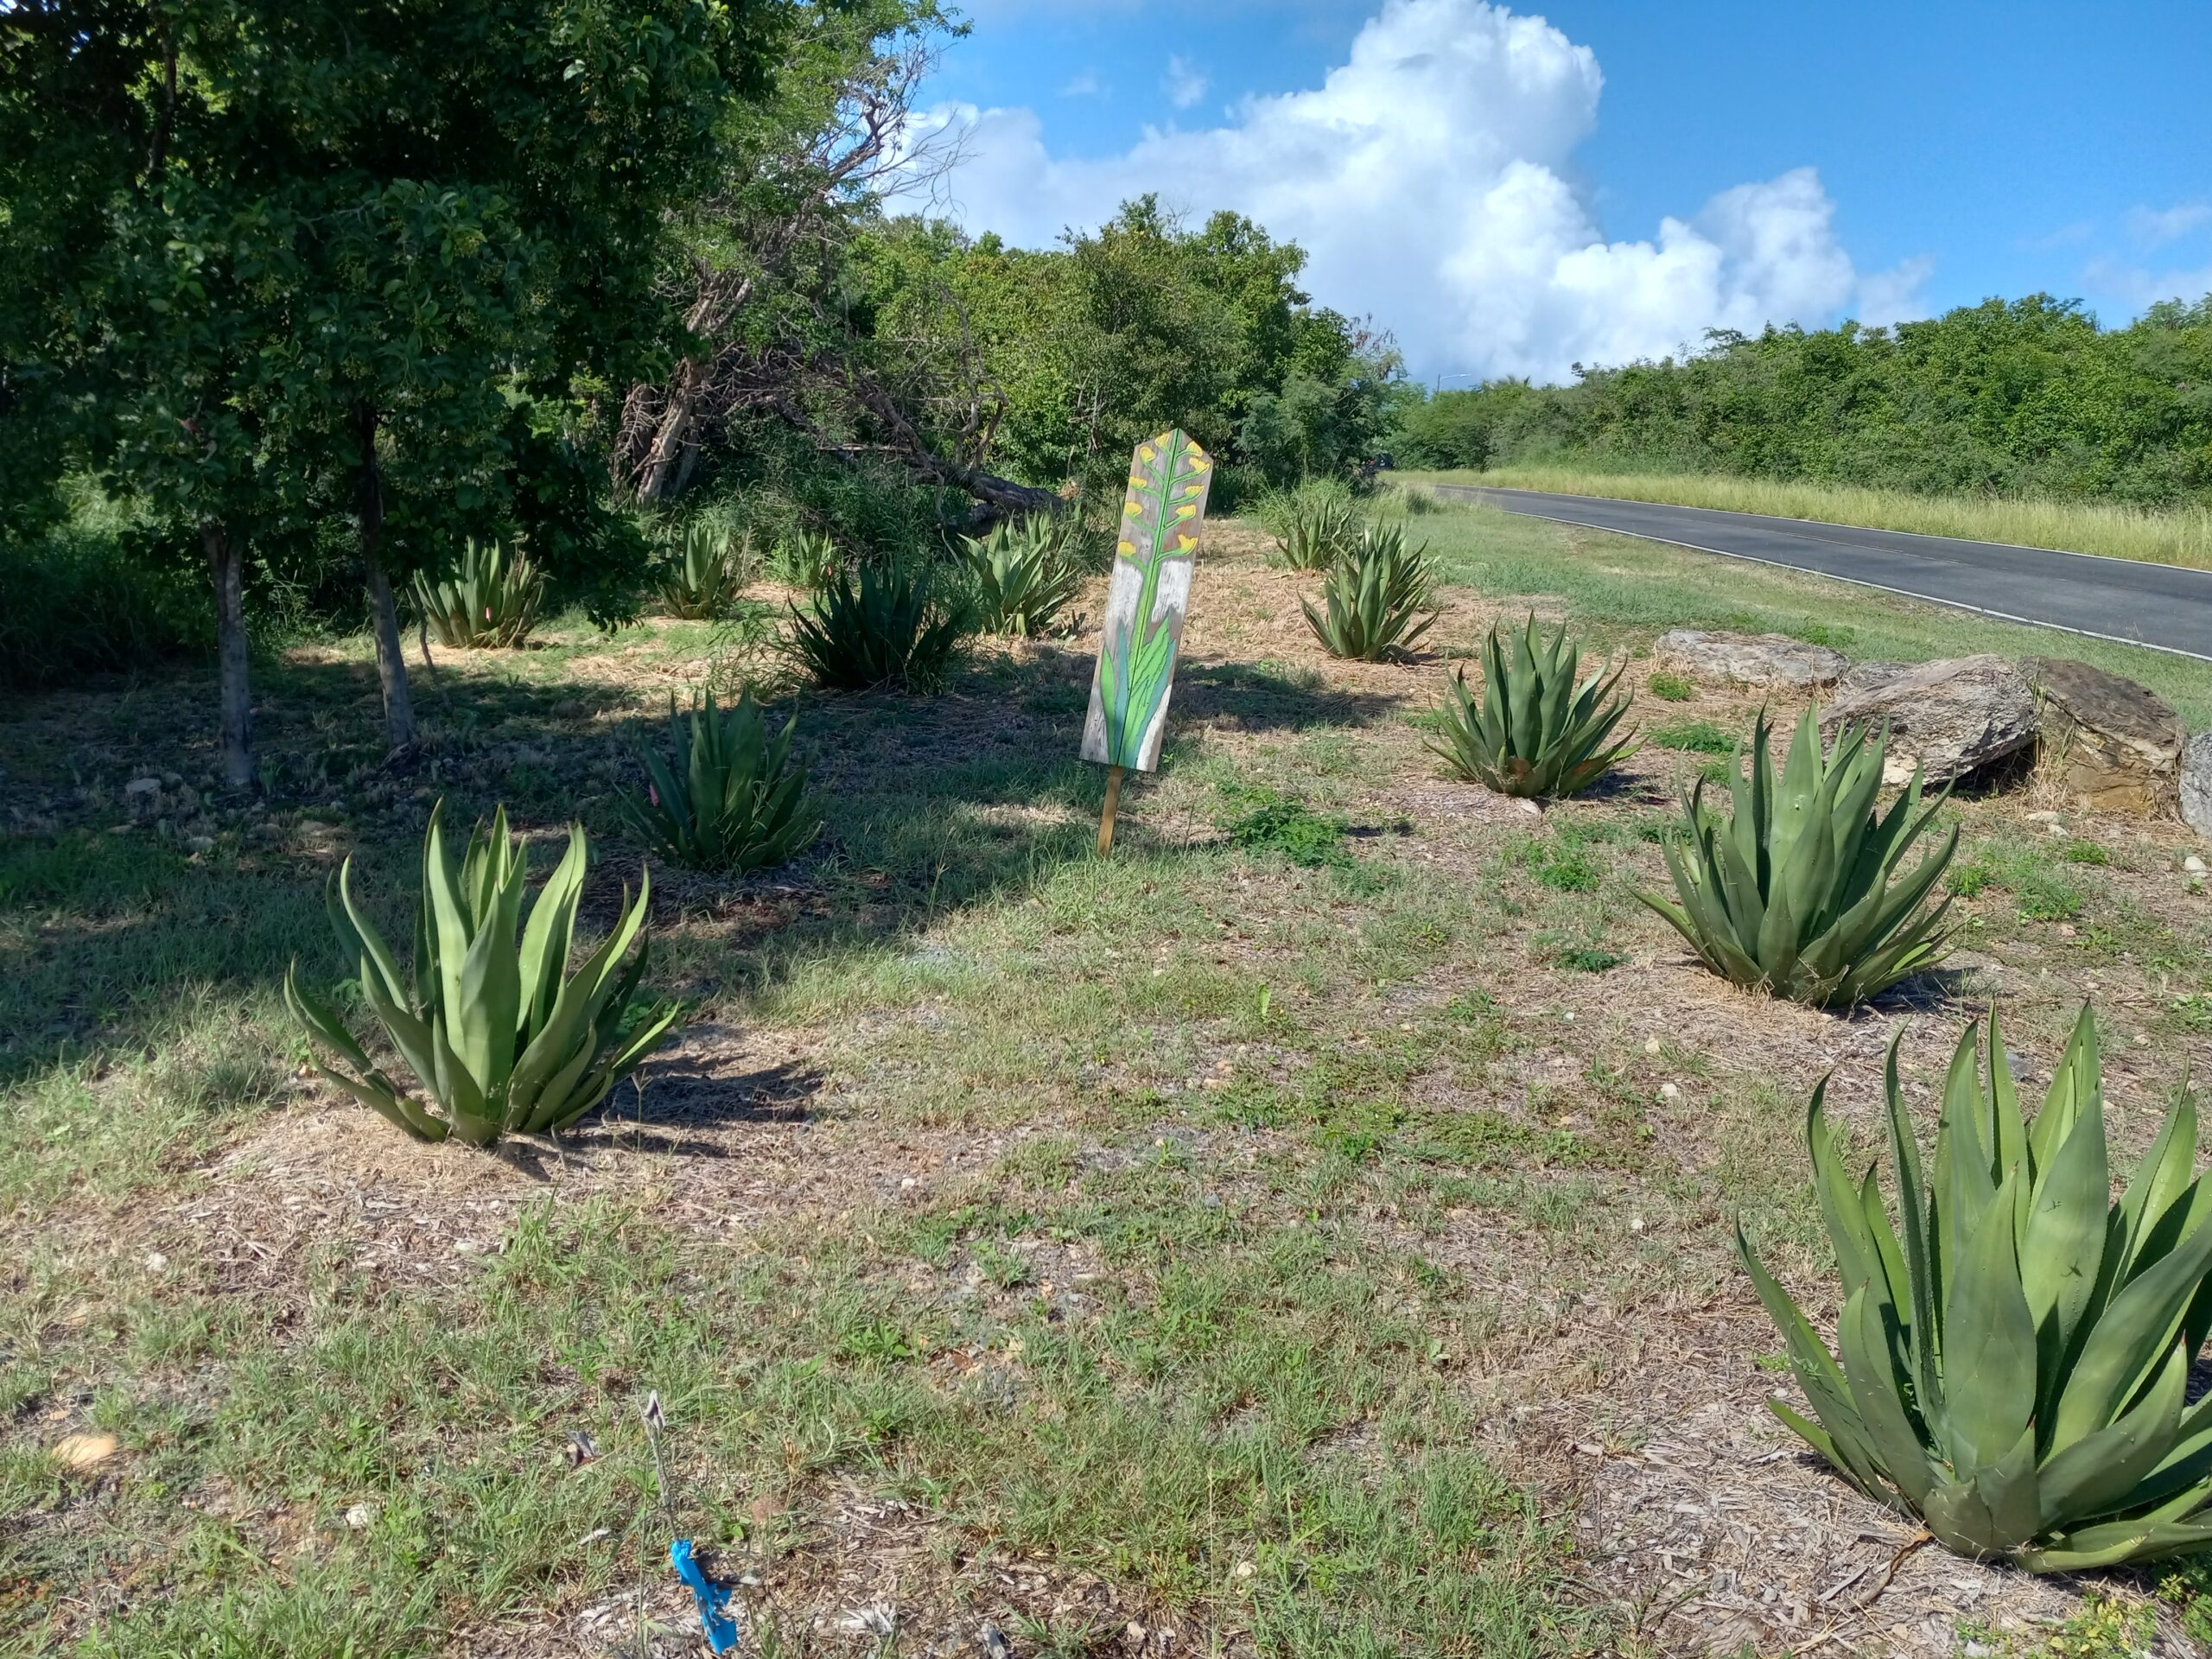 The Agave eggersiana is a unique plant to the Virgin Islands landscape, but it is endemic only to the island of St. Croix. These planted Agave eggersiana are at Sandy Point National Wildlife Refuge entrance to the wildlife sanctuary. There is ongoing planting program to safe the Agave eggersiana from becoming extinct on the island of St. Croix. (Photo by Olasee Davis)